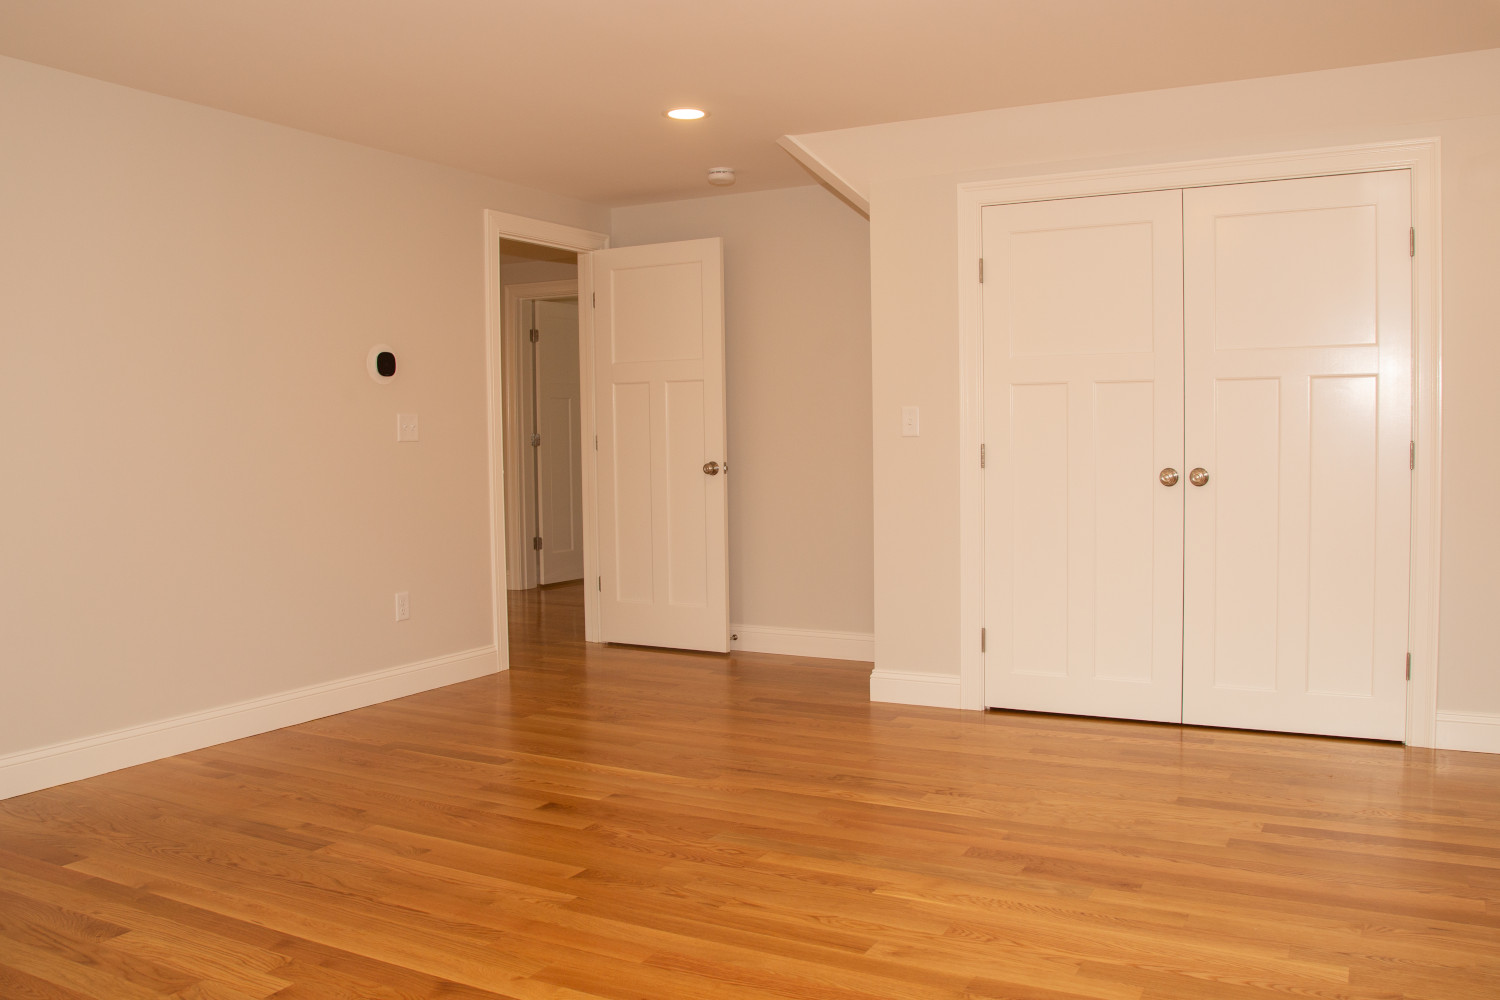 Room with wood floor and closet